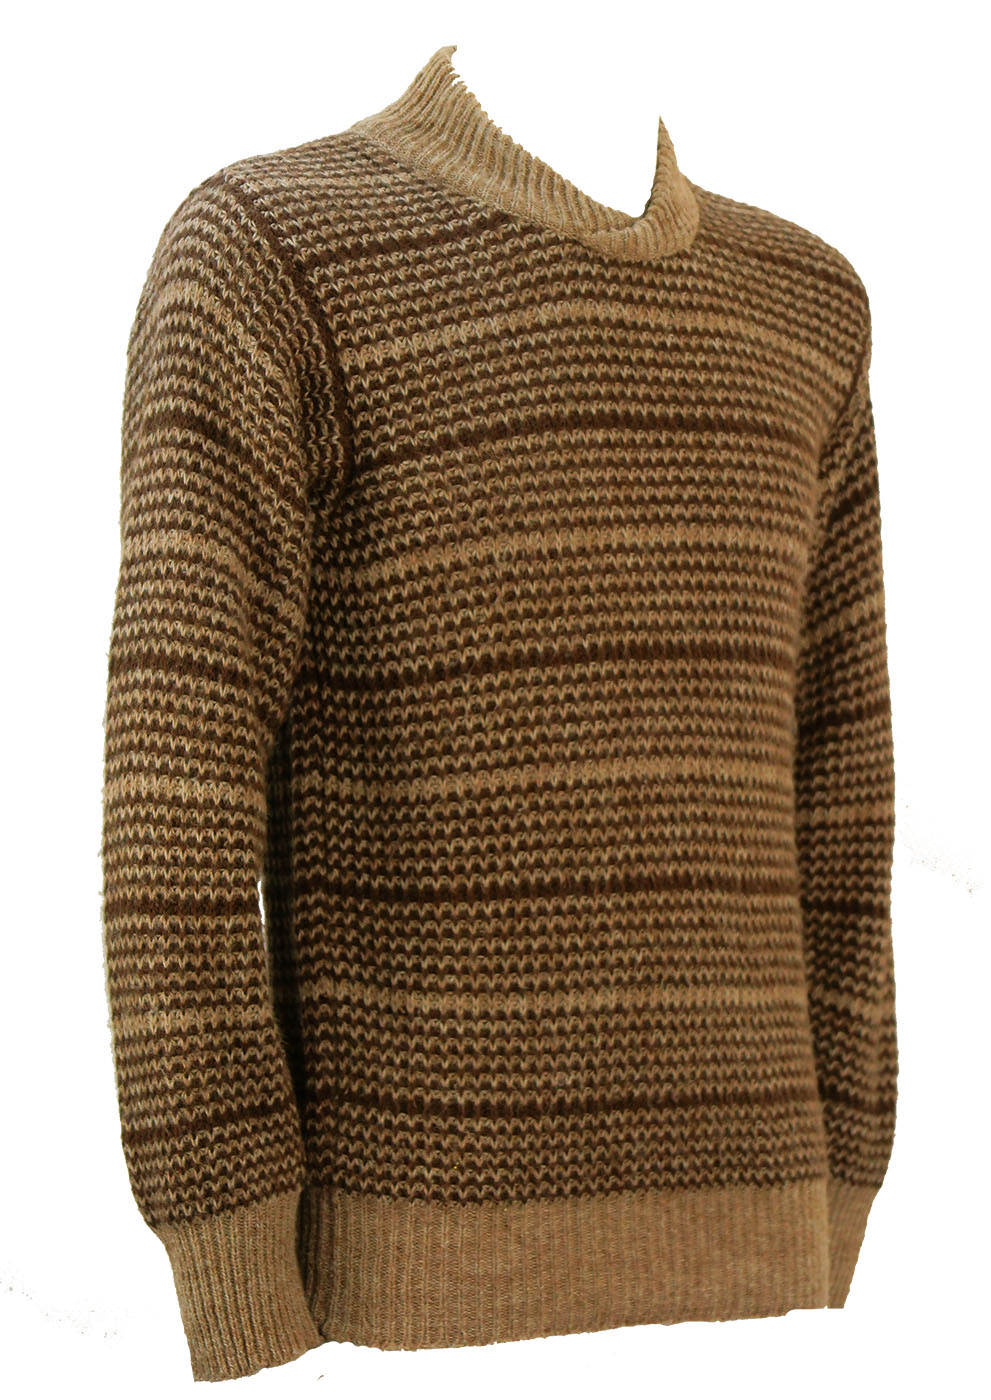 Brown & Beige Striped Knit Jumper with Crossover Collar Detail - S ...